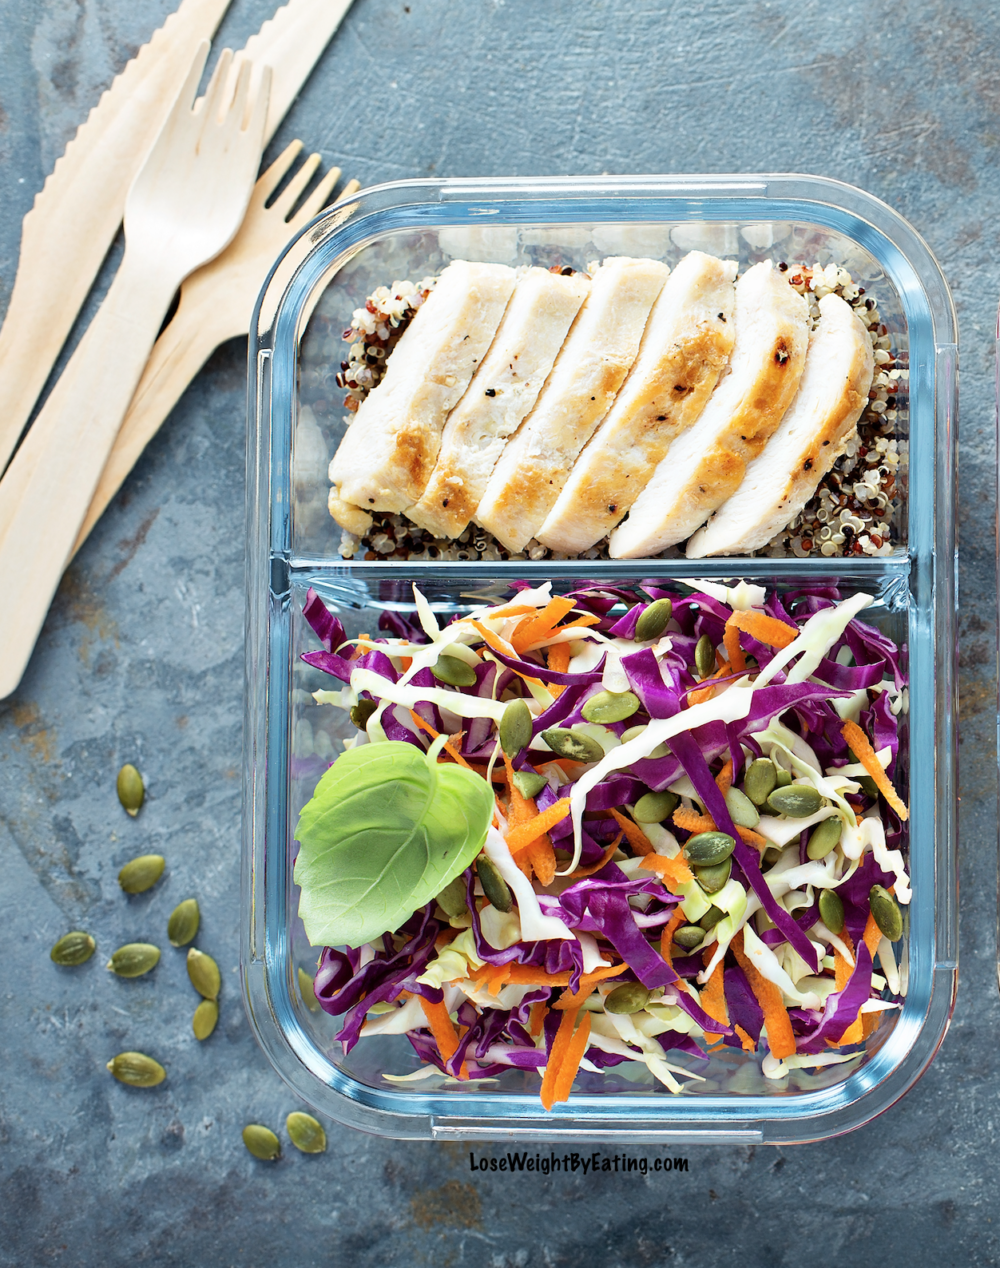 FAT BURNING Quinoa Meal Prep Lunches